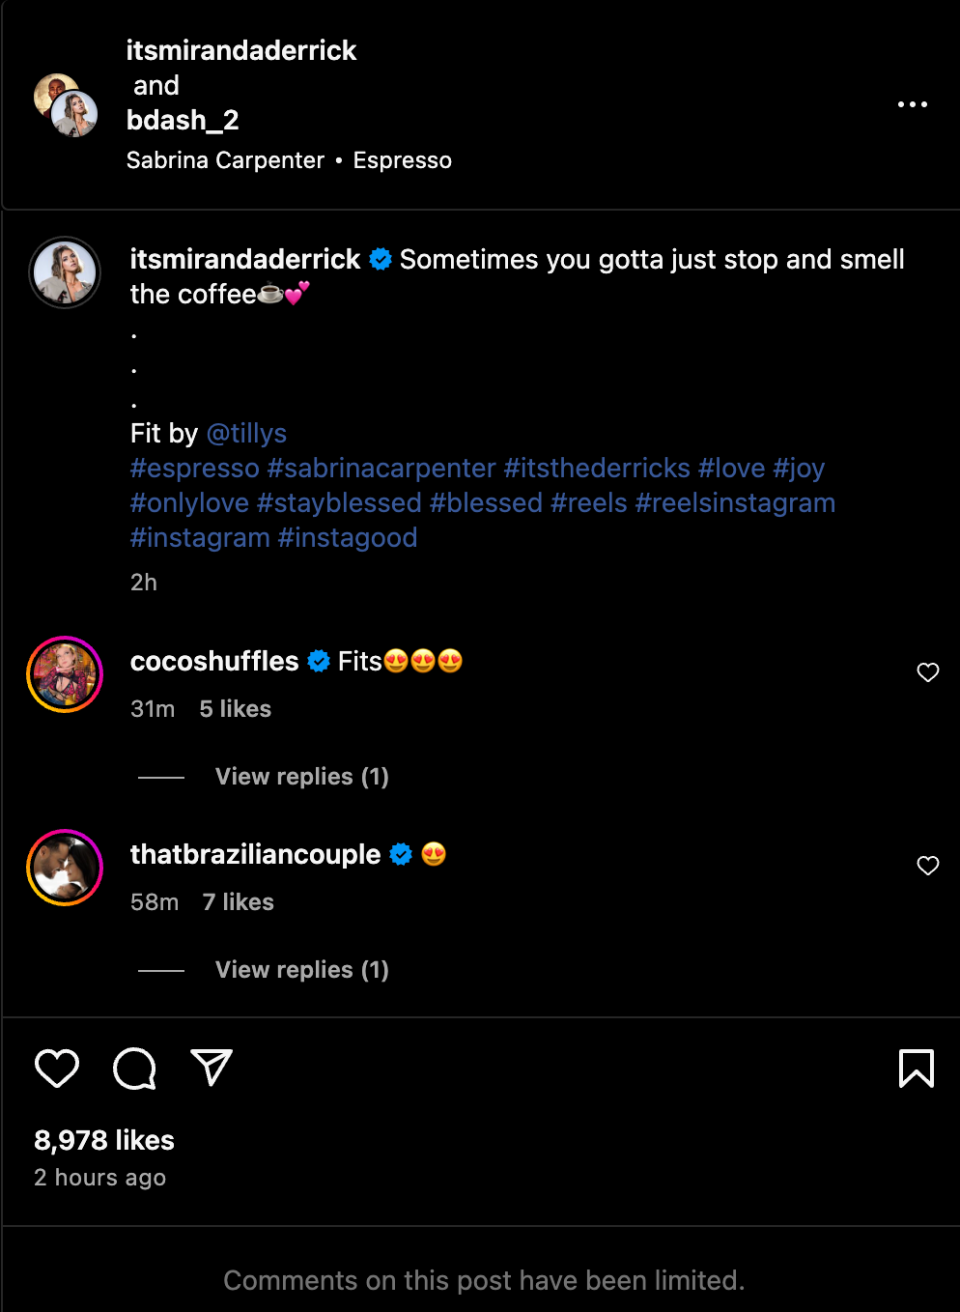 The limited comments section of Derrick's new post on May 31.